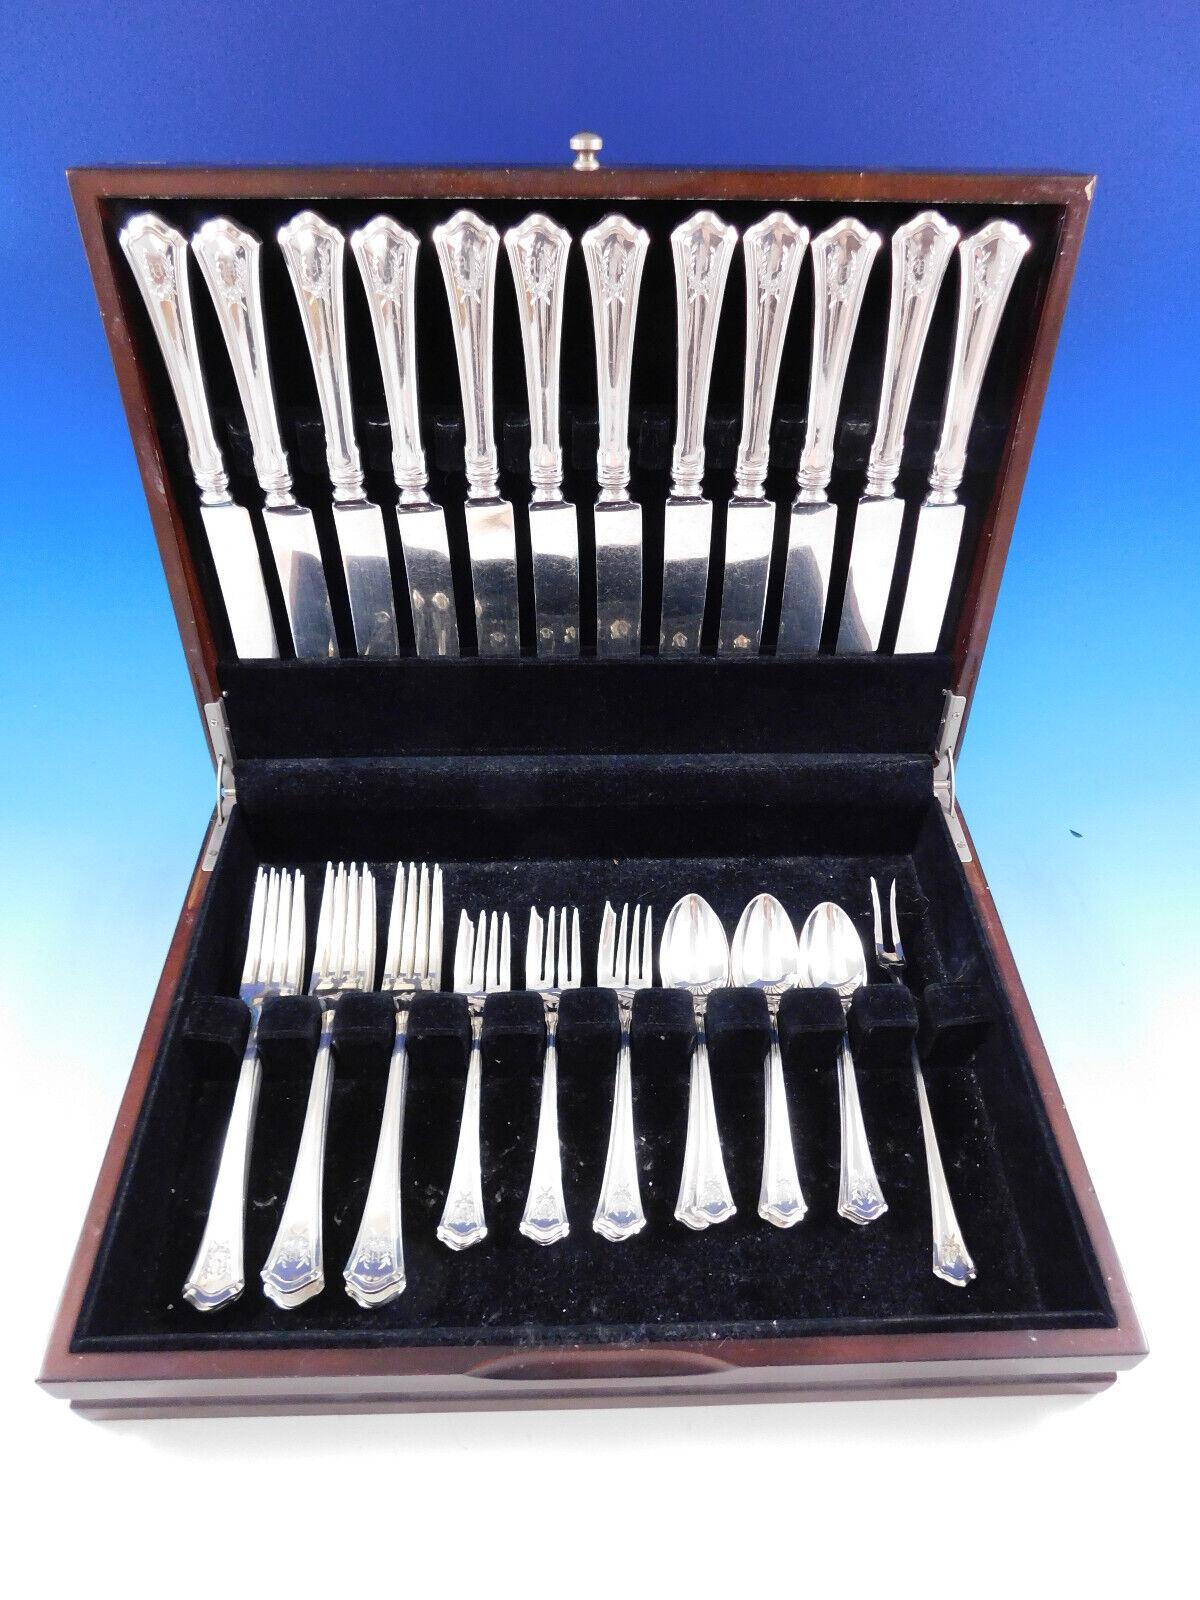 Rare dinner size Custis by Wallace, circa 1911, sterling silver Flatware set - 49 pieces. This set includes:
12 dinner size knives, 9 7/8